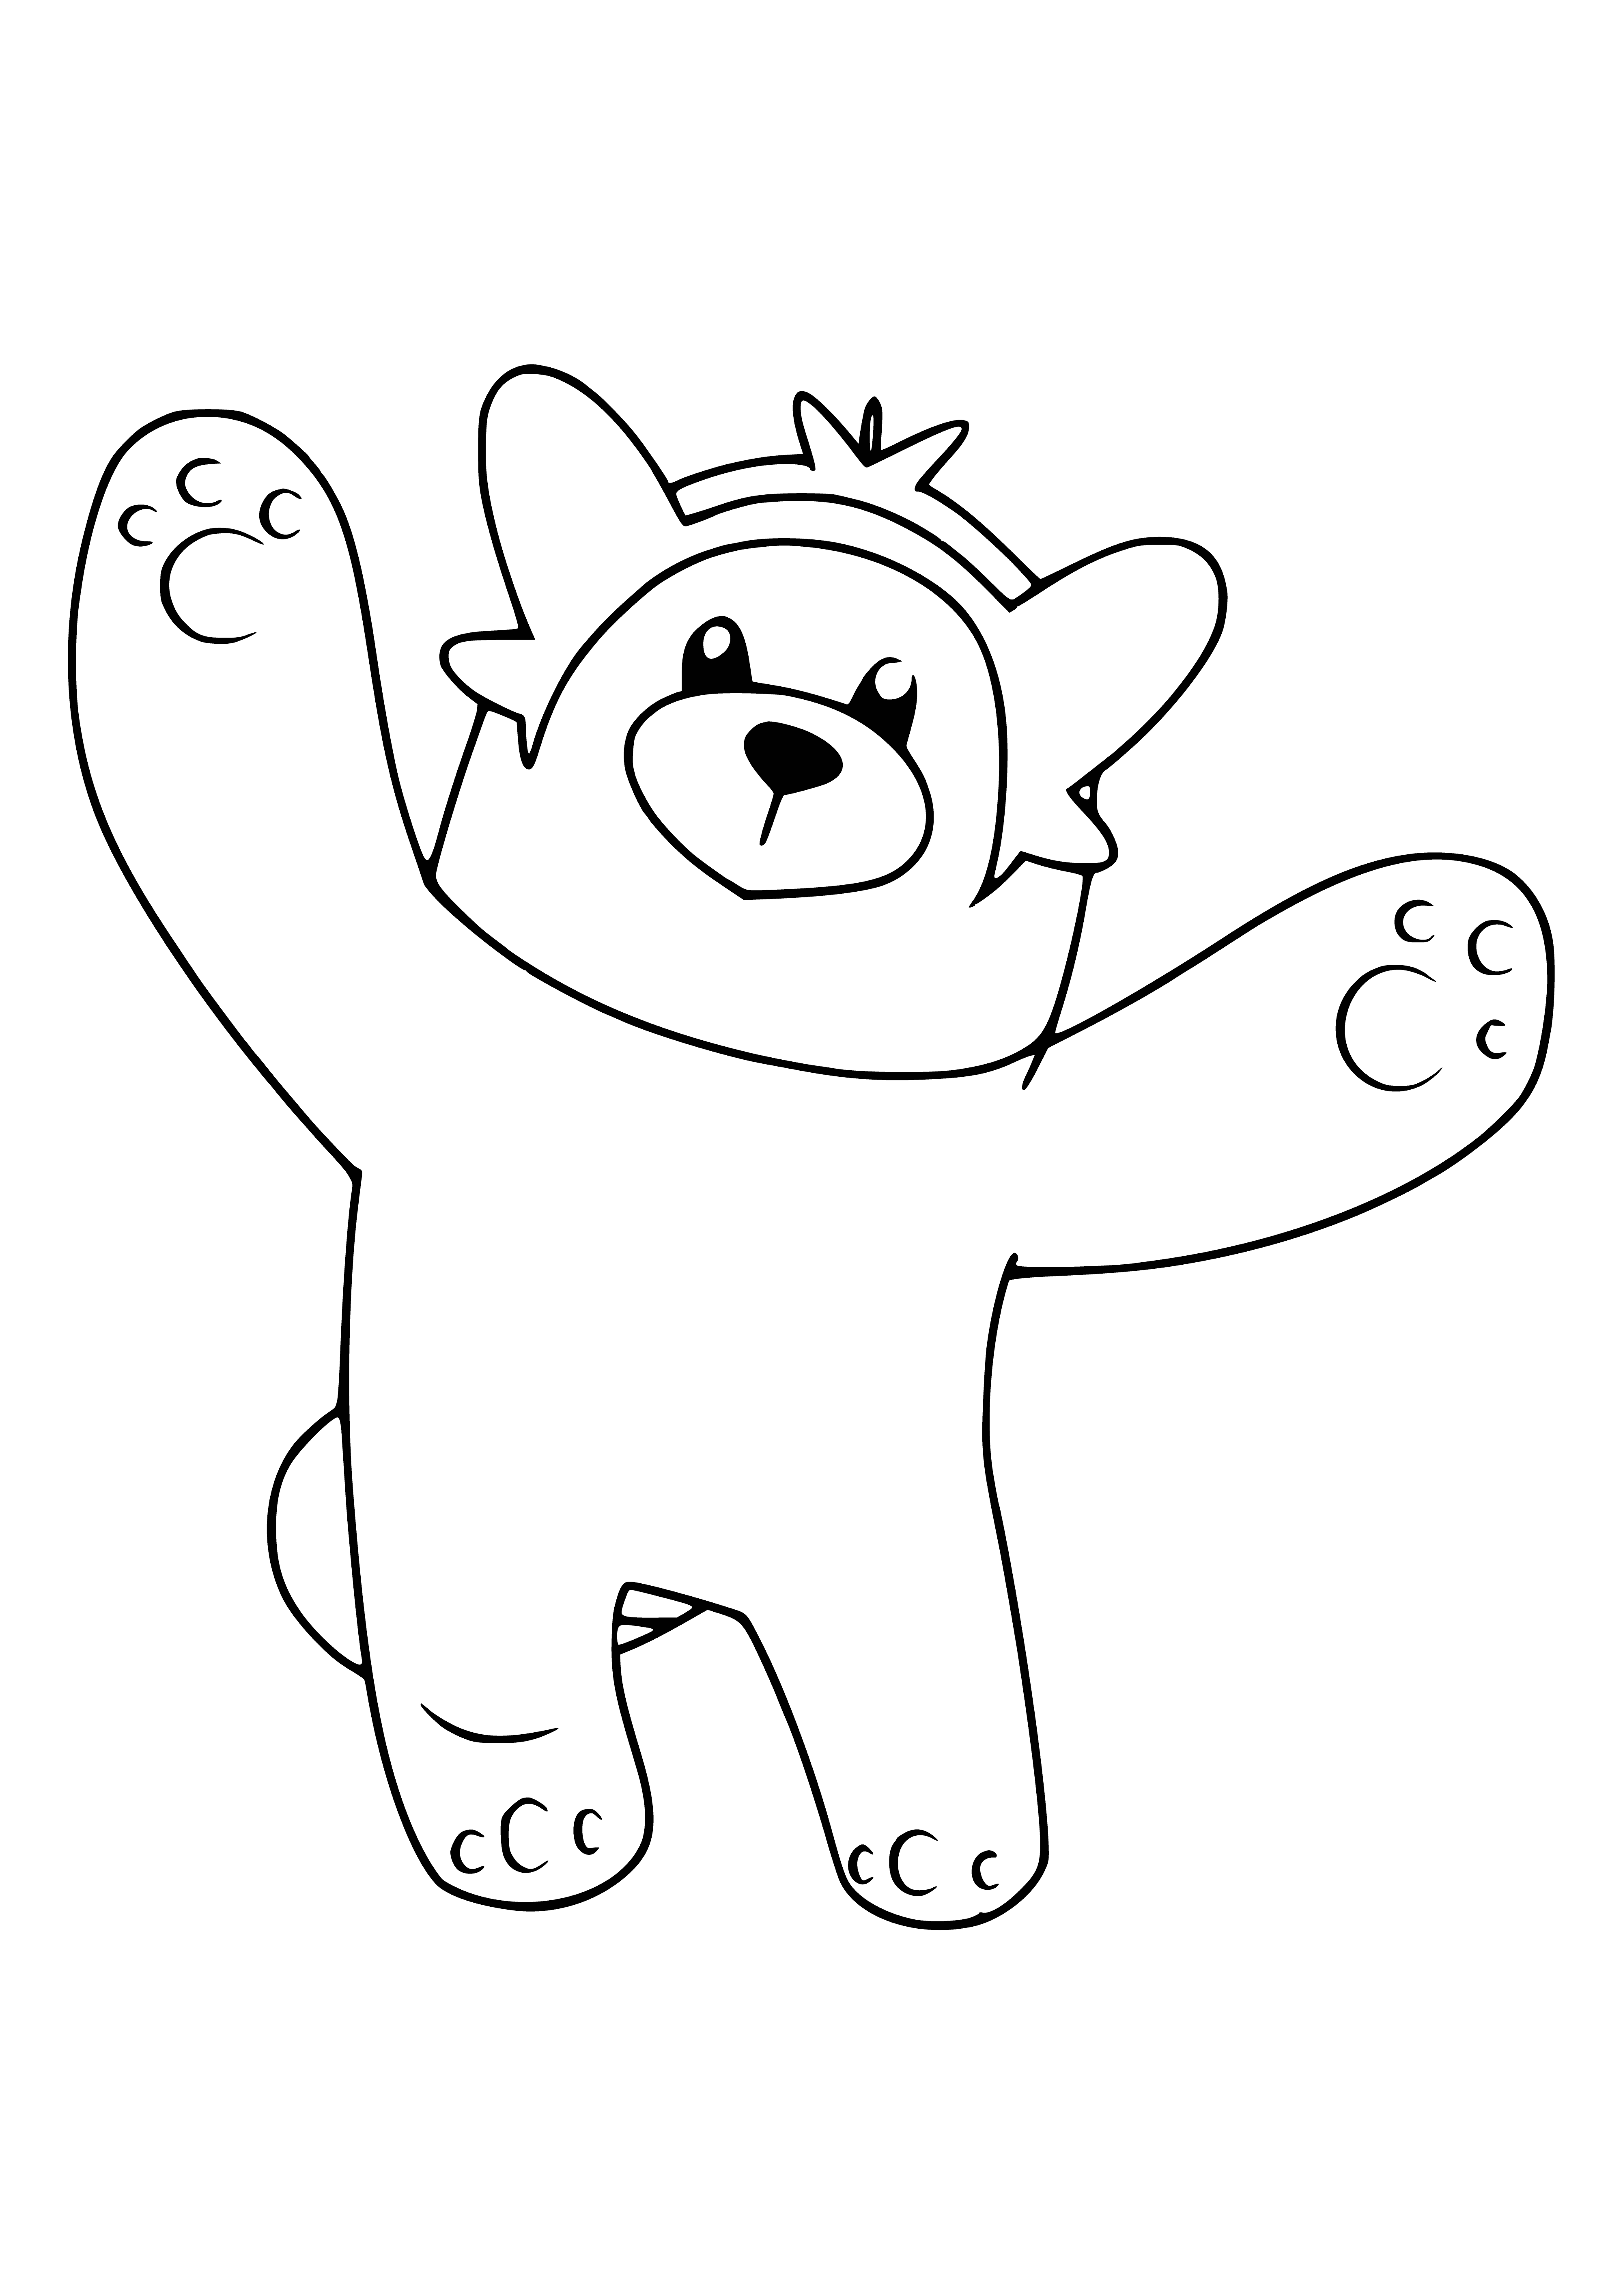 coloring page: Bewear is a large, bear-like Pokémon w/ shaggy fur, black rings, triangular ears, sharp teeth, & strong limbs. Its paws have 3 claws & it has a long, black tail.